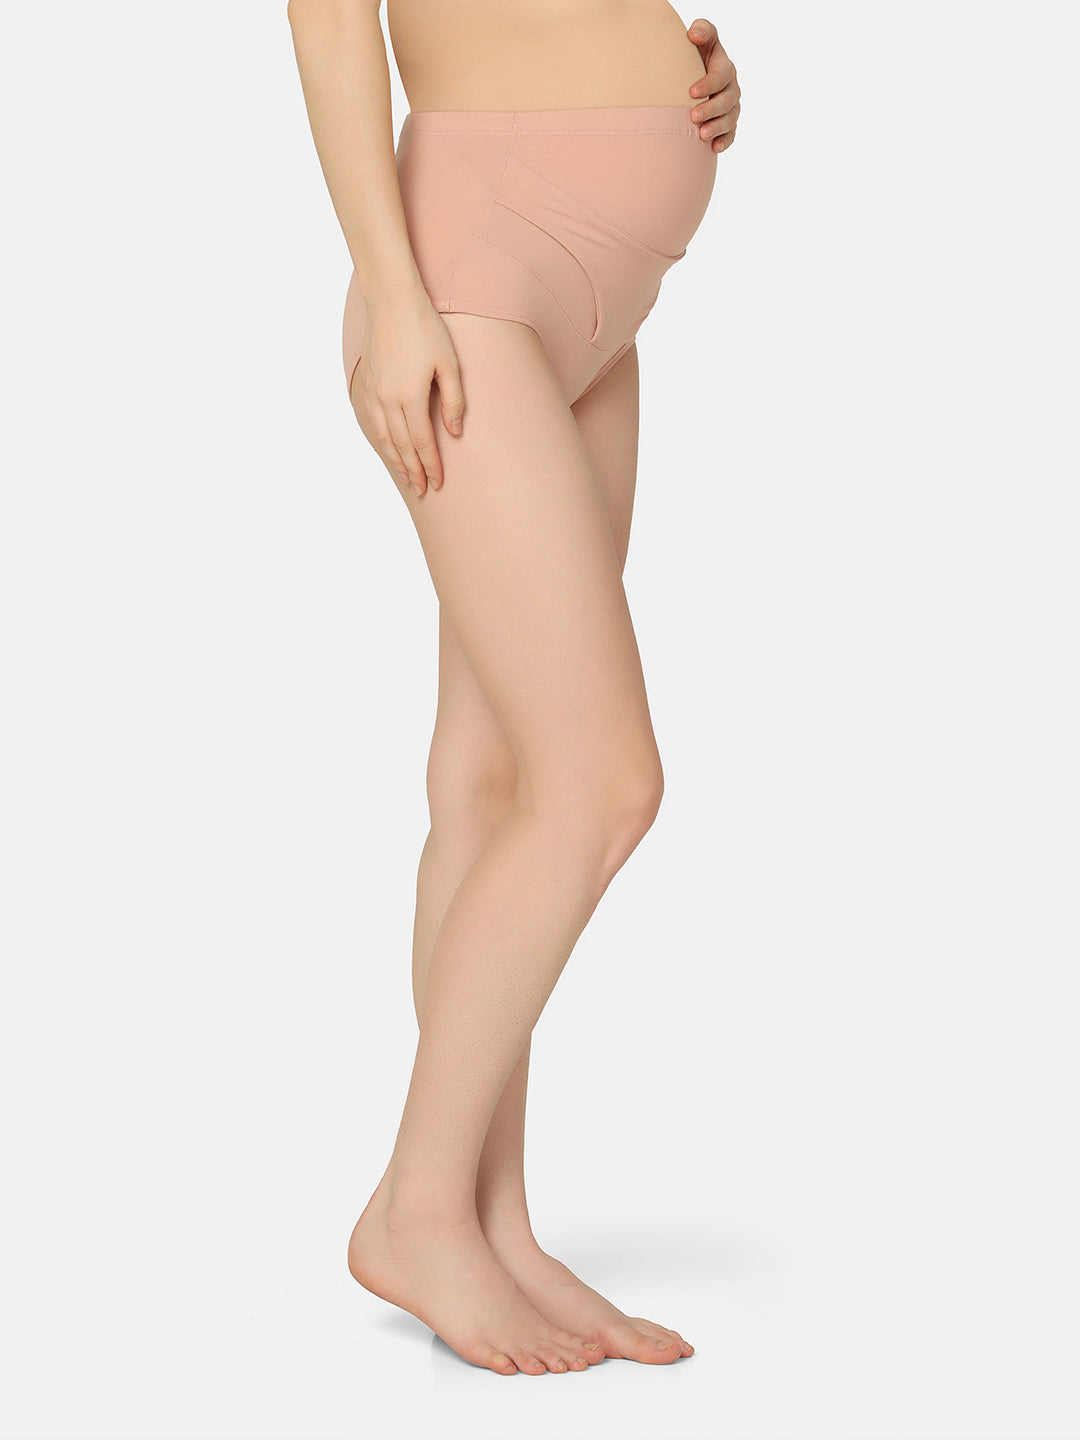 High Rise Pre Pregnancy Tummy Support Panty - Da Intimo - Lingerie Online Store India